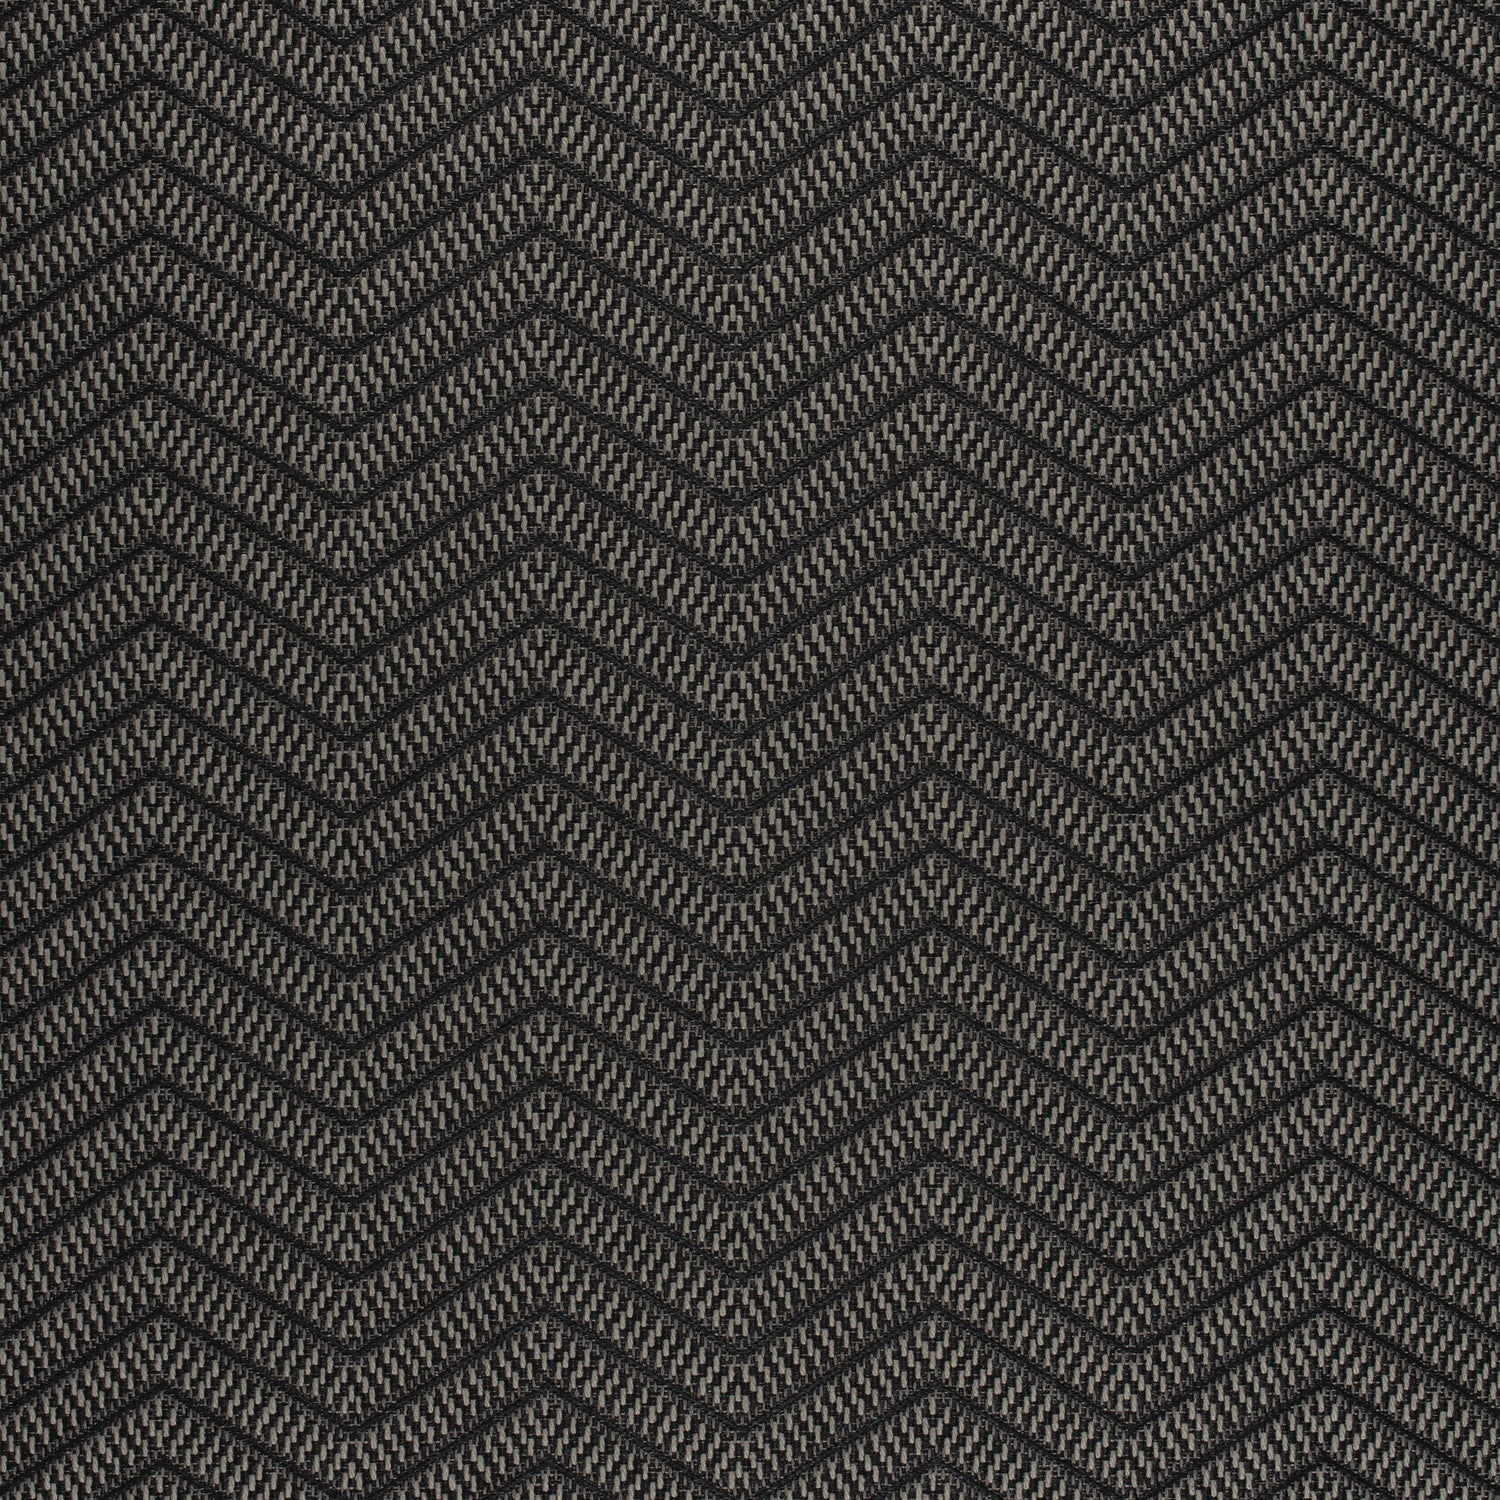 Matari Chevron fabric in black color - pattern number W80638 - by Thibaut in the Pinnacle collection